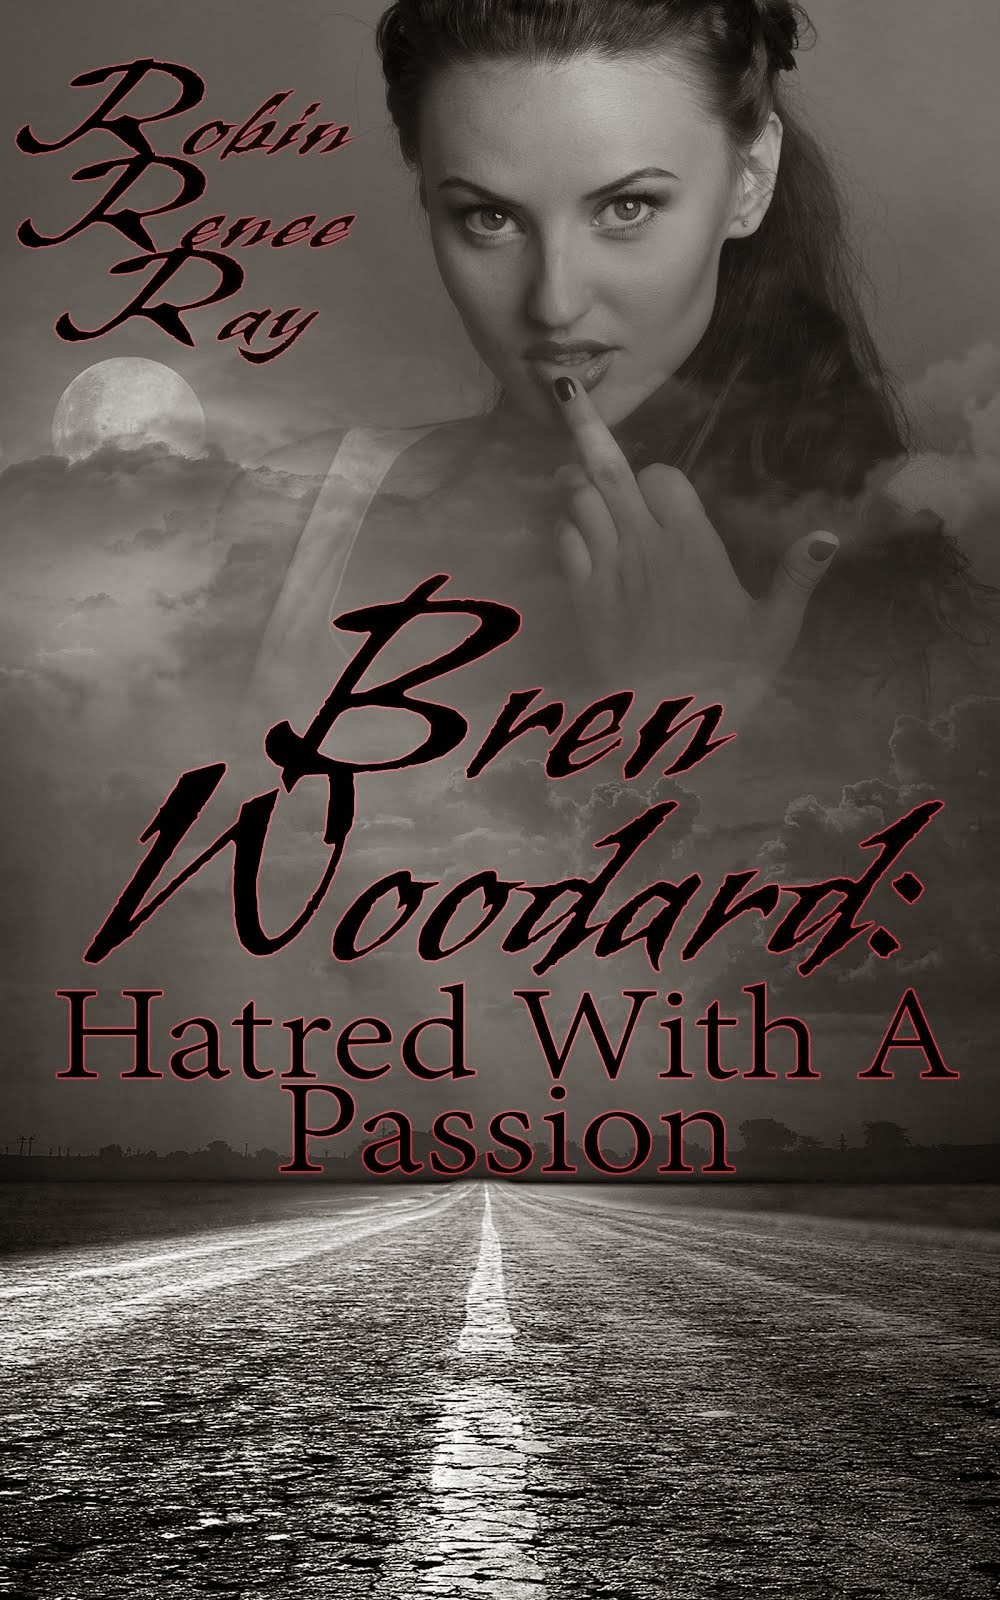 Bren Woodard: Hatred, With a Passion